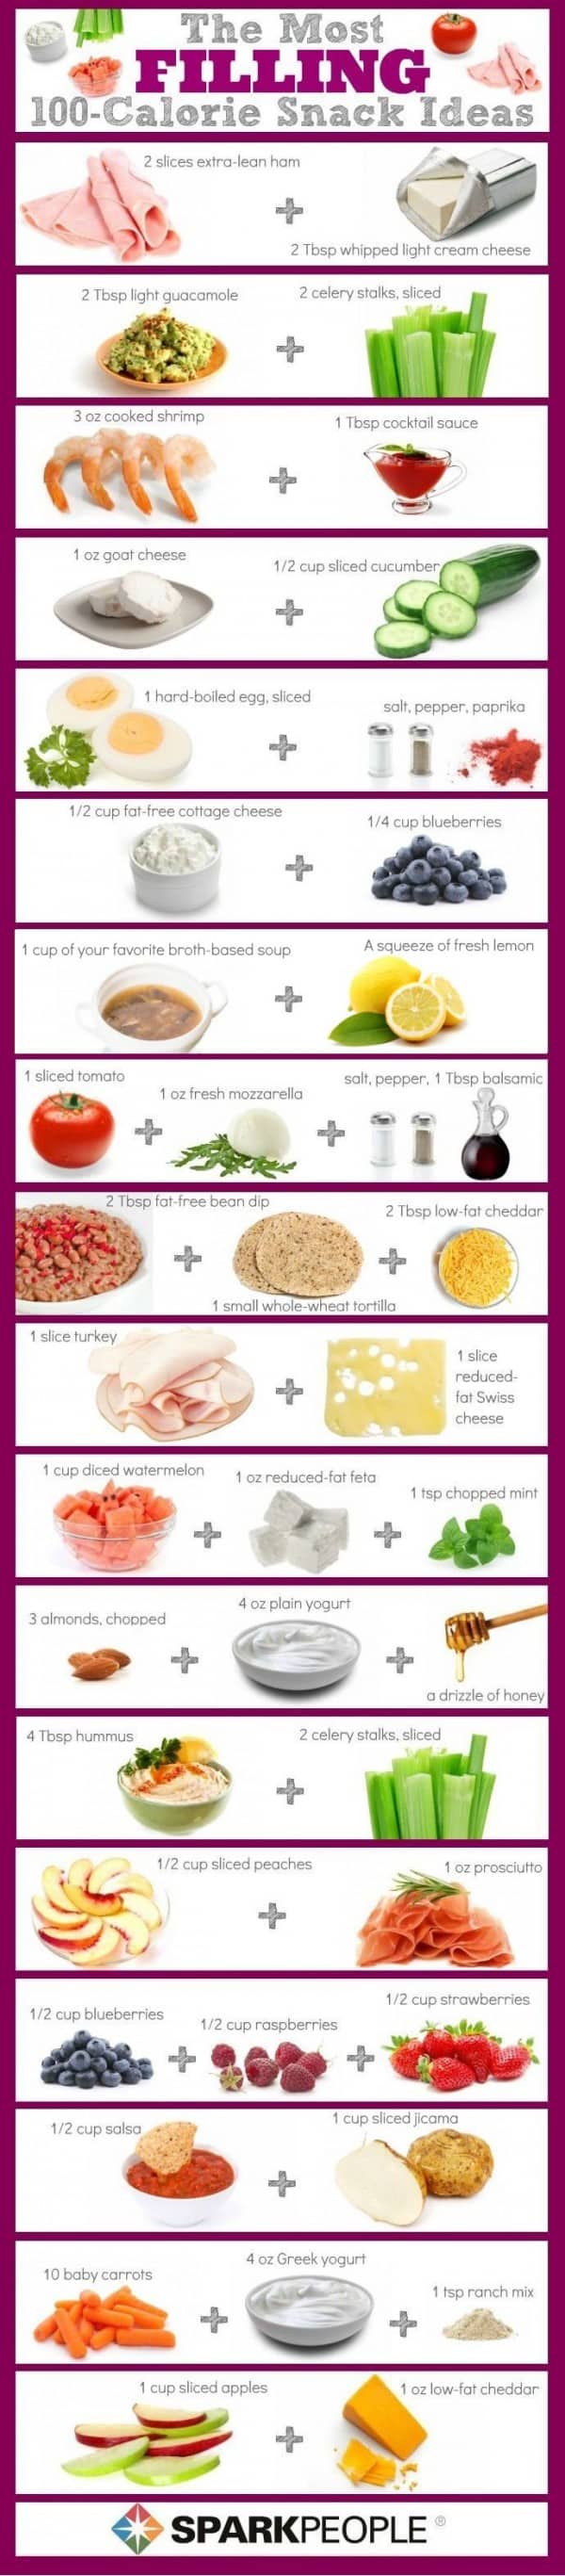 The most filling 100-calorie snack ideas infographic from SparkPeople